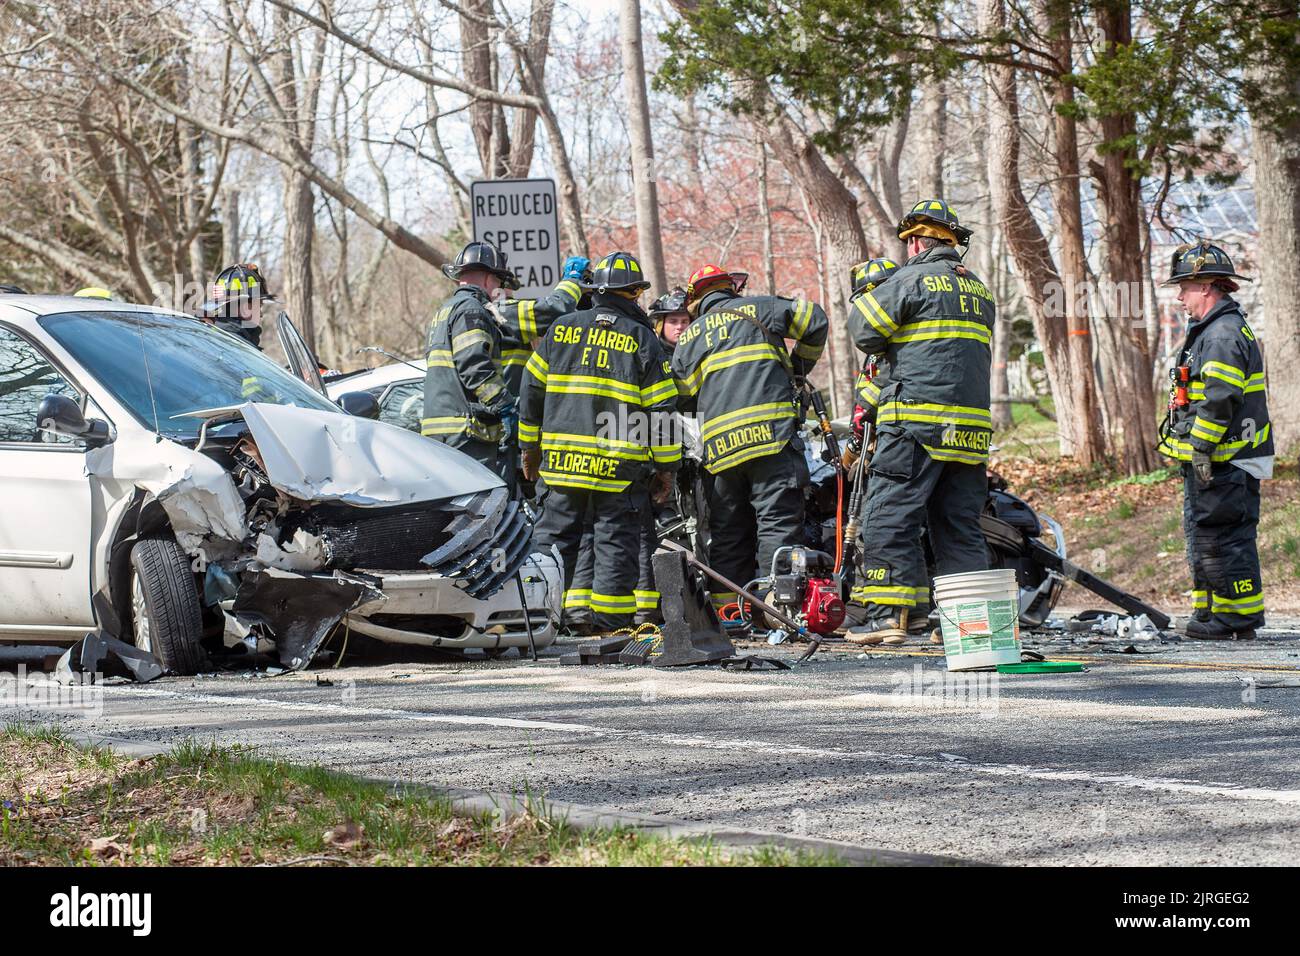 Members of the Sag Harbor Ambulance and Fire Department Heavy Rescue Squad work to extricate and care for the victims of a three-car motor vehicle acc Stock Photo